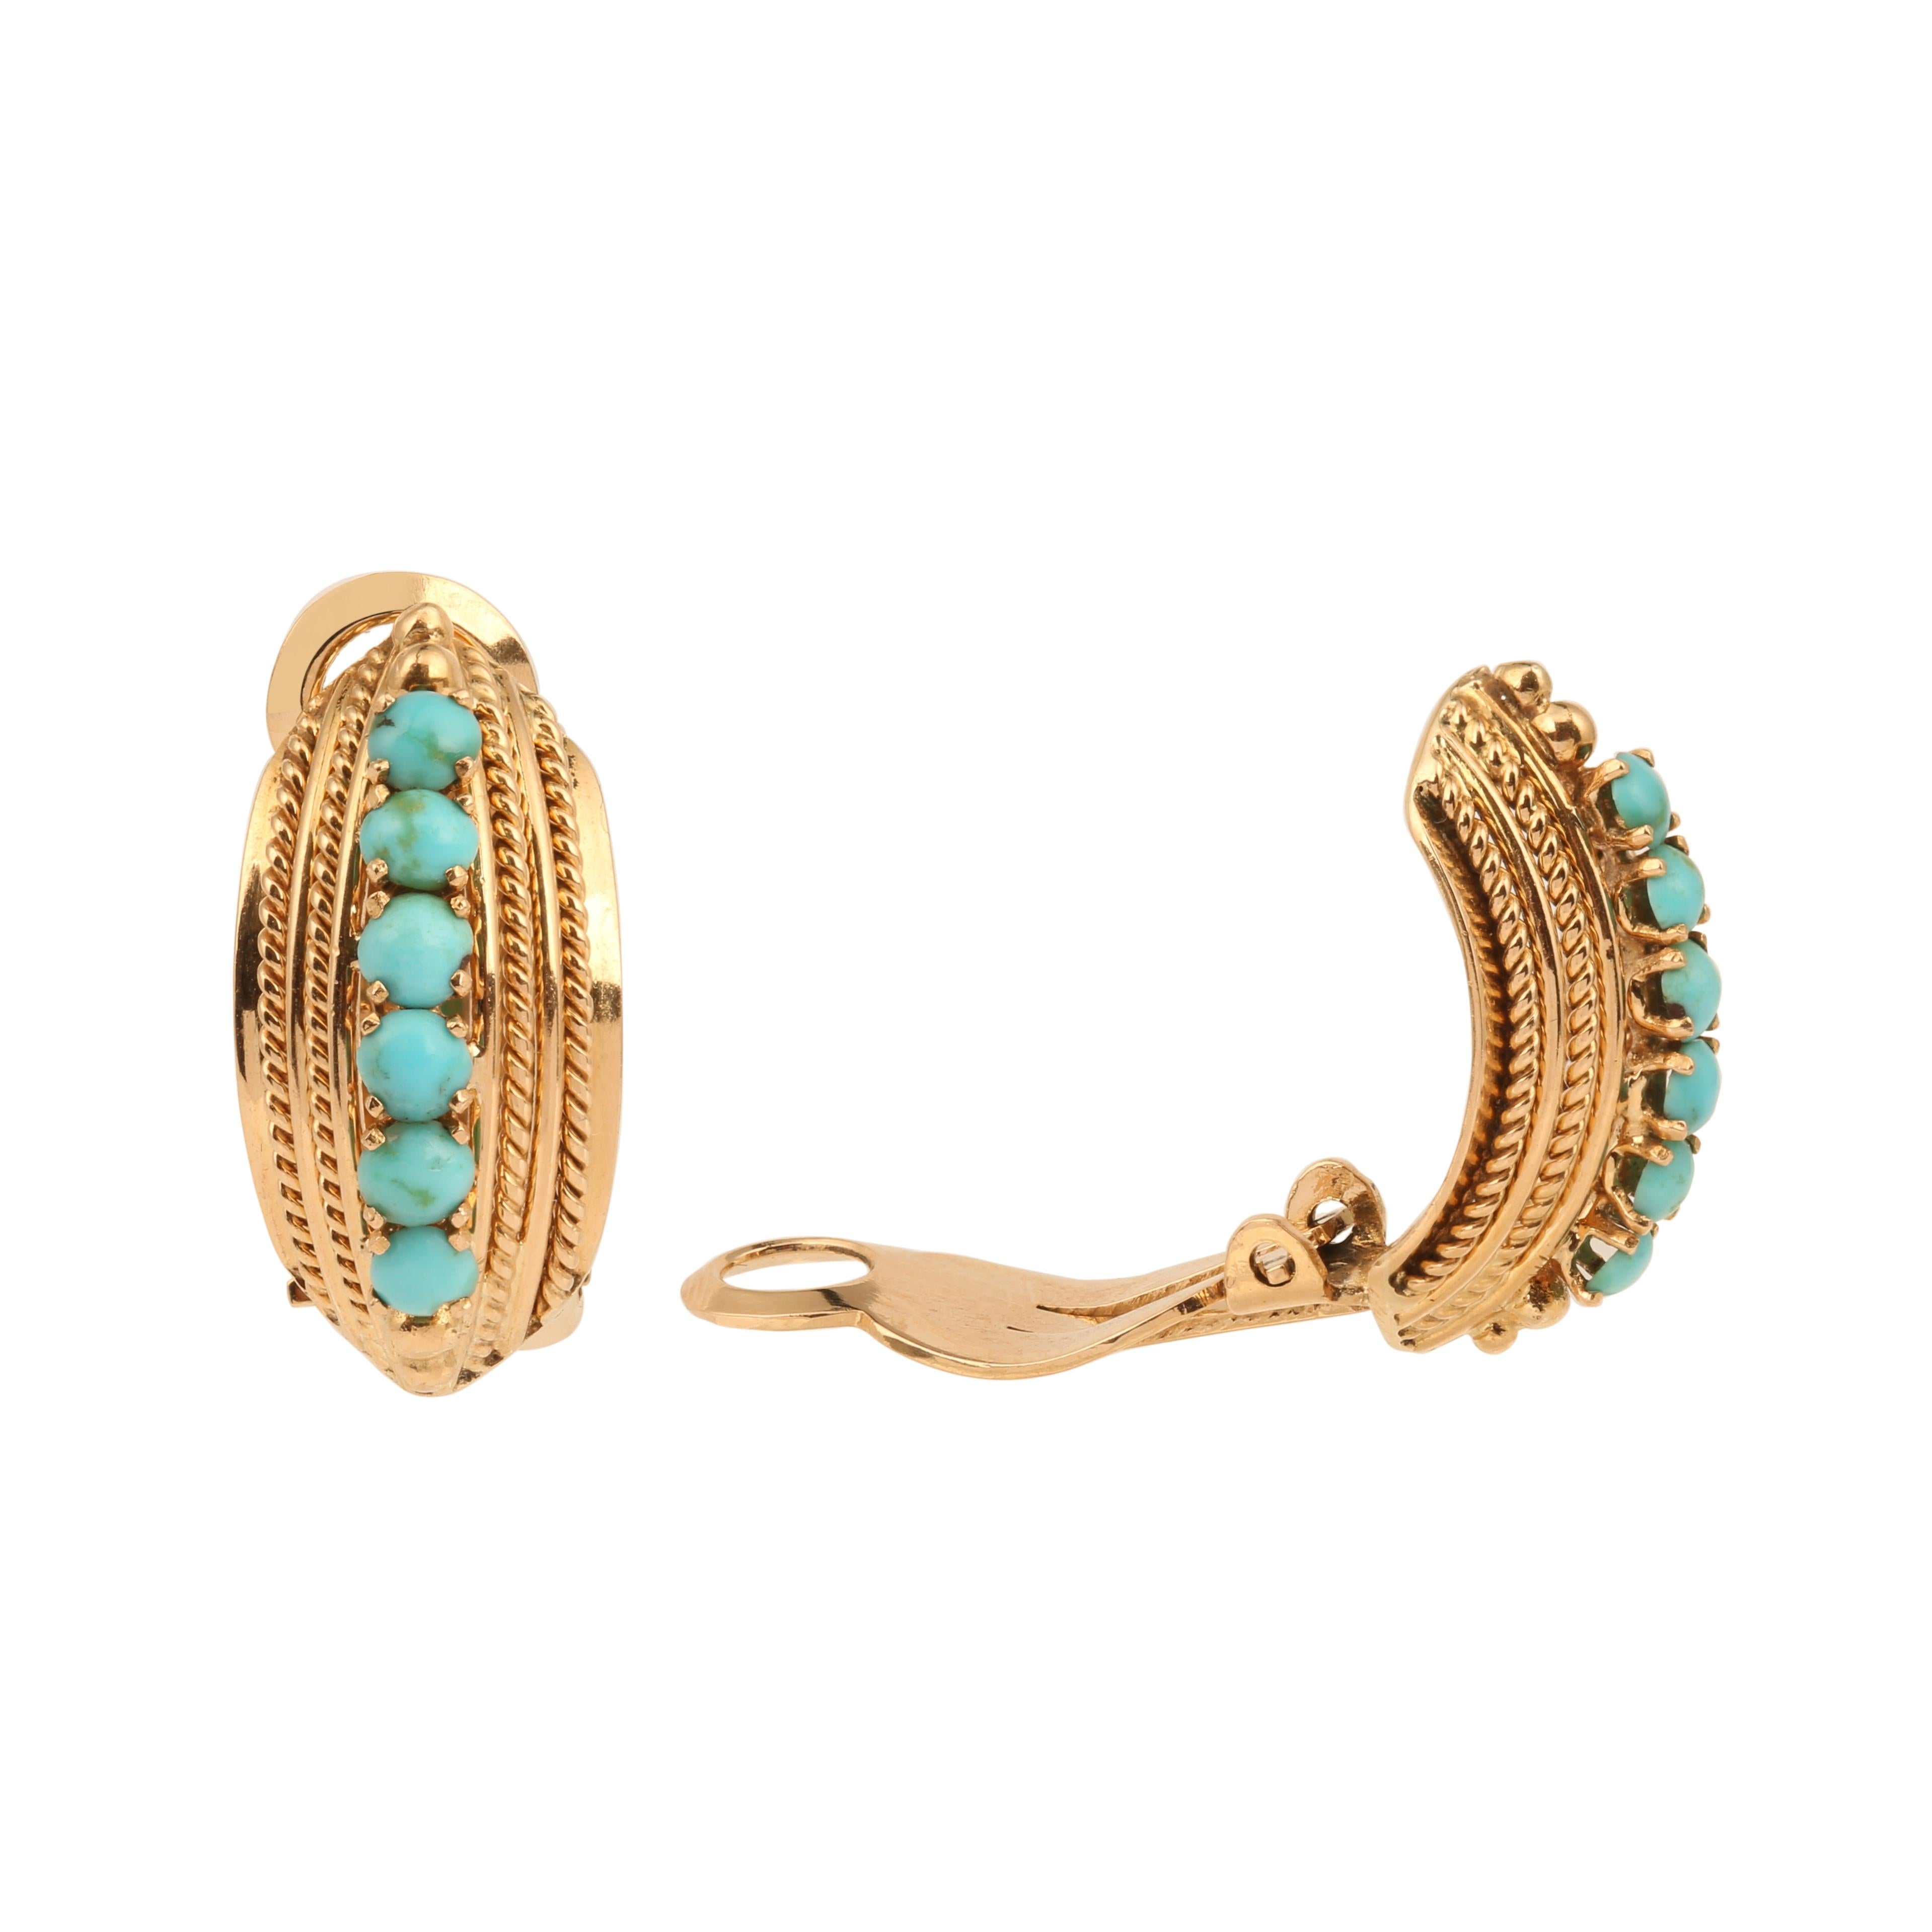 Braided yellow gold tiered earrings set with turquoise stones.

Total estimated turquoise weight: 0.80 carats

Dimensions: 22.15 x 10.72 x 10 mm (0.872 x 0.422 x 0.393 inches)

Pair weight: 9.70 g

French work circa 1960-1970

18-carat rose gold,